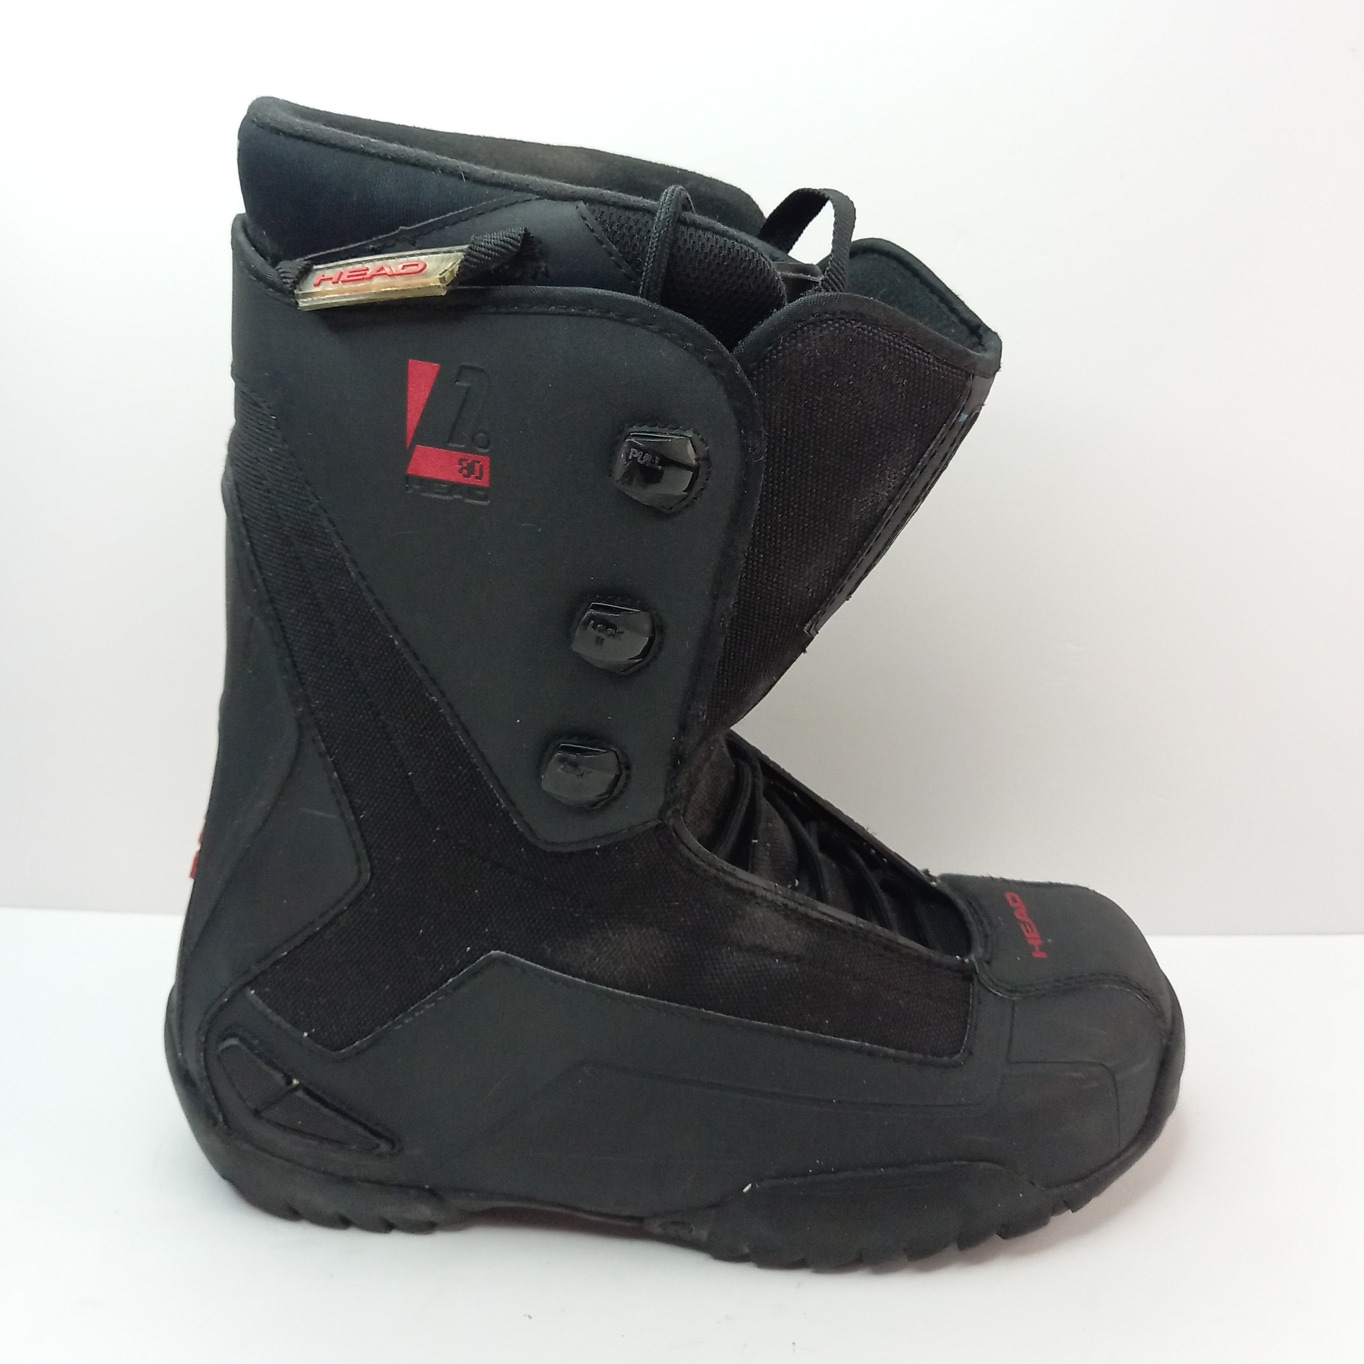 Men's Used Size 10 (Women's 11) HEAD custom therma fit Snowboard Boots